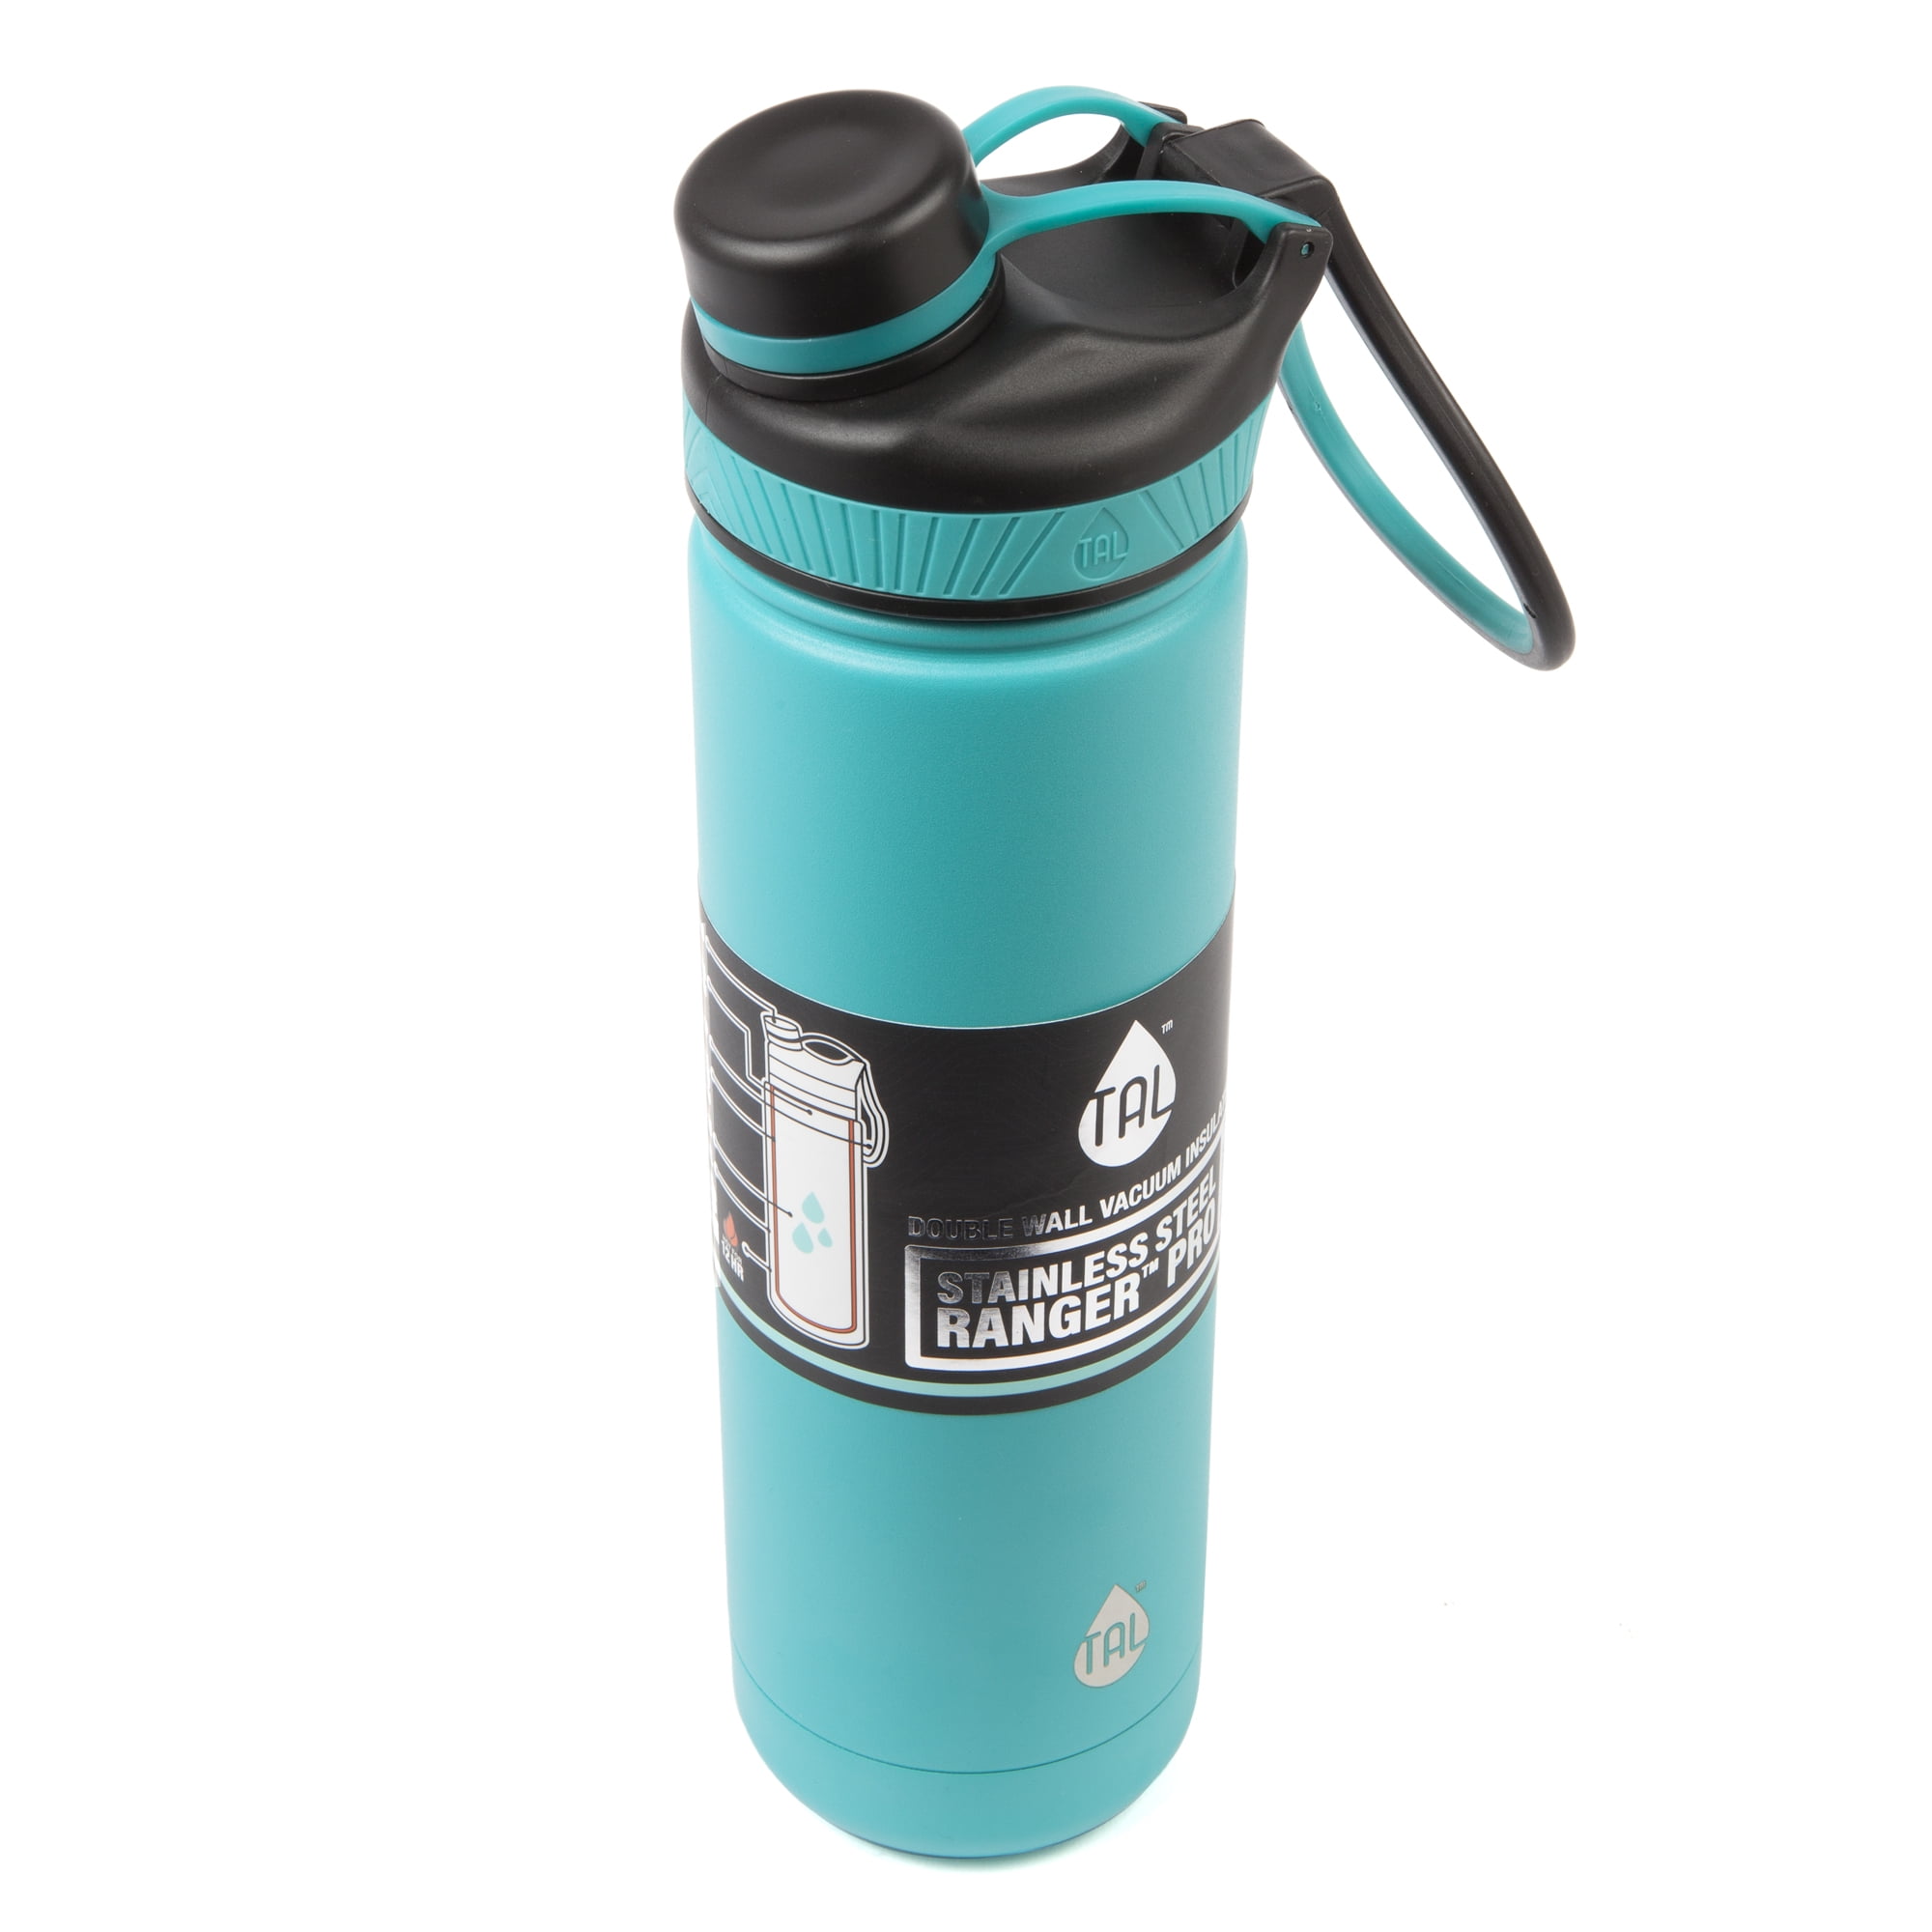 Tal 64OZ Ranger Pro Stainless Steel Vacuum Insulated Water Bottle -  Leak-Proof Double Walled Thermos w/Carry Loop 80 Hrs Cold, 26 Hot Reusable  Metal